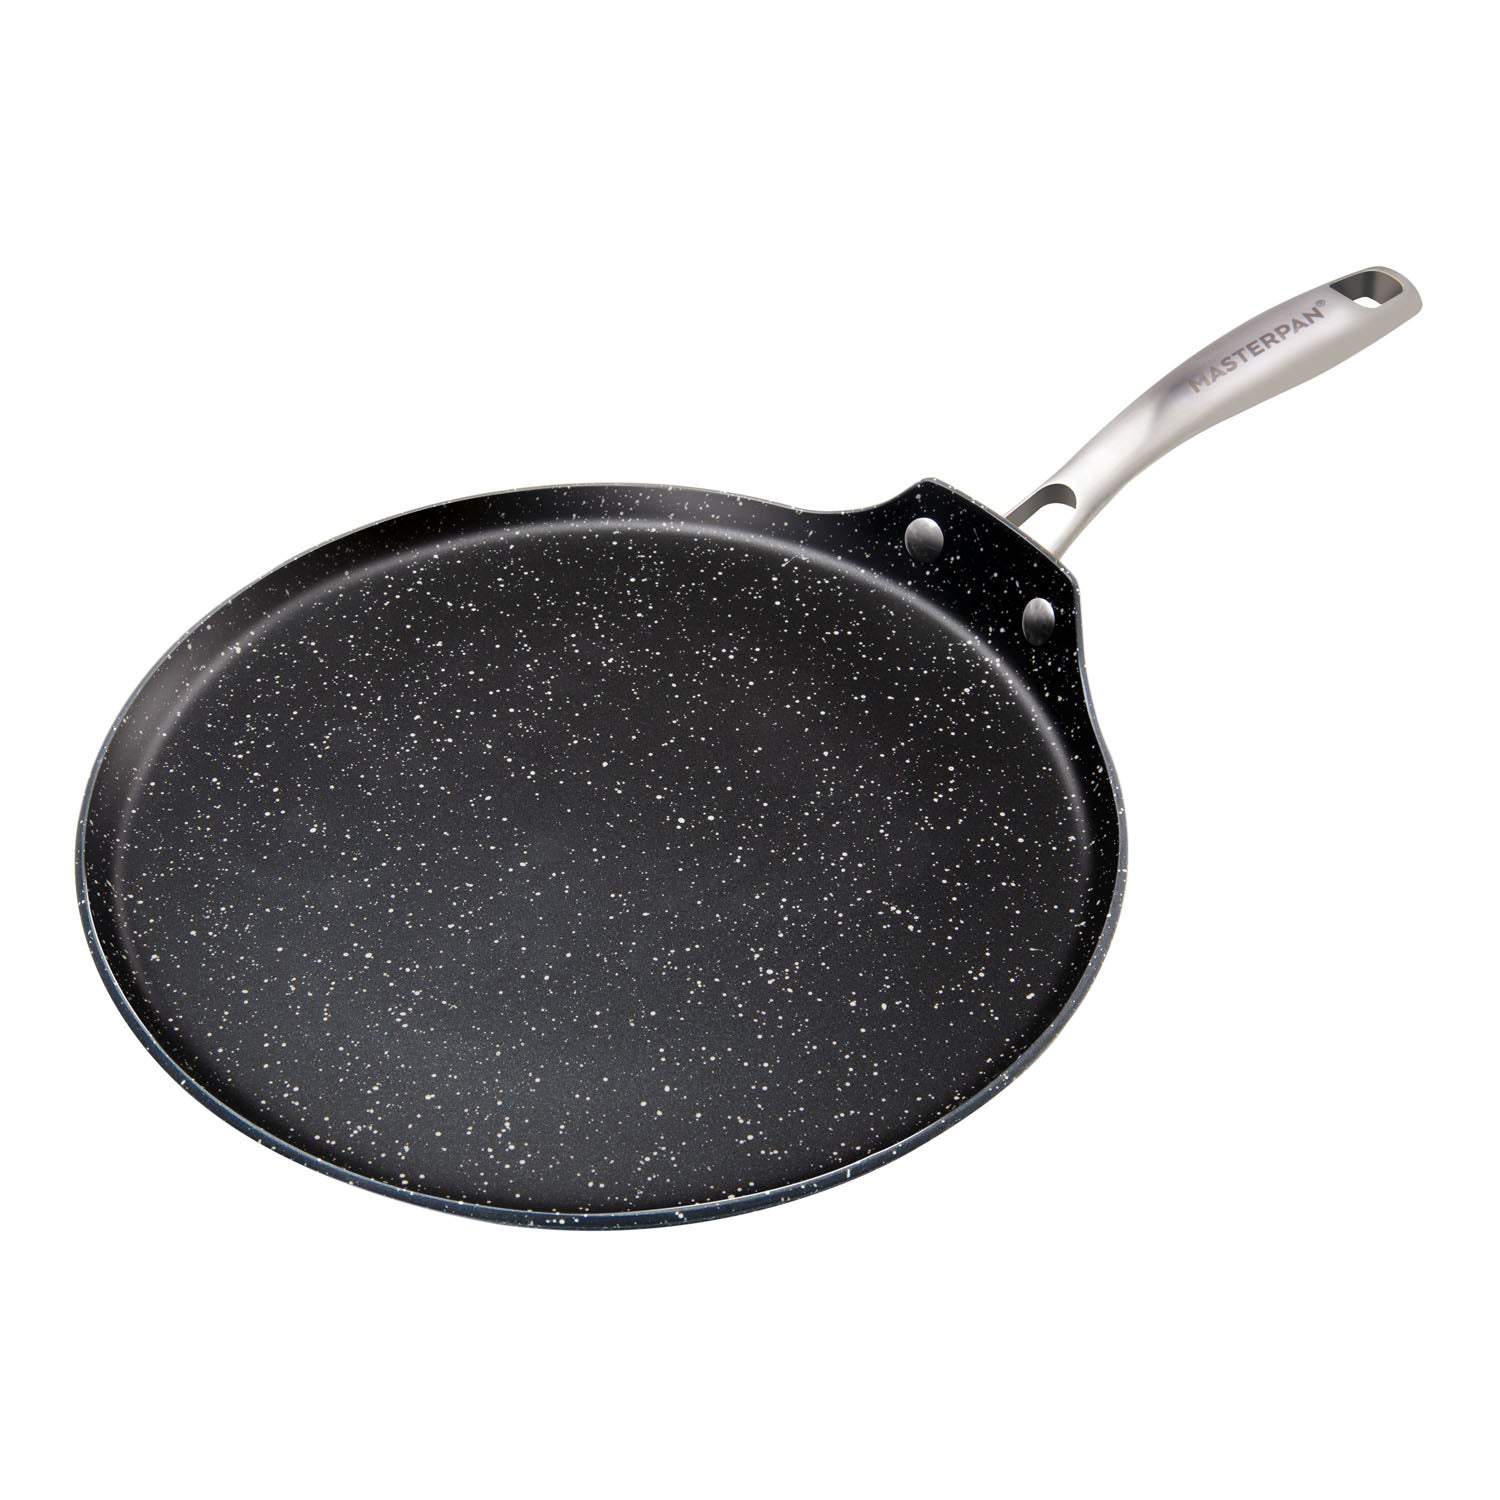 MasterPan MP-128 11 in. Crepe Pan & Non-Stick Aluminium Cookware with Stainless Steel Riveted Handle